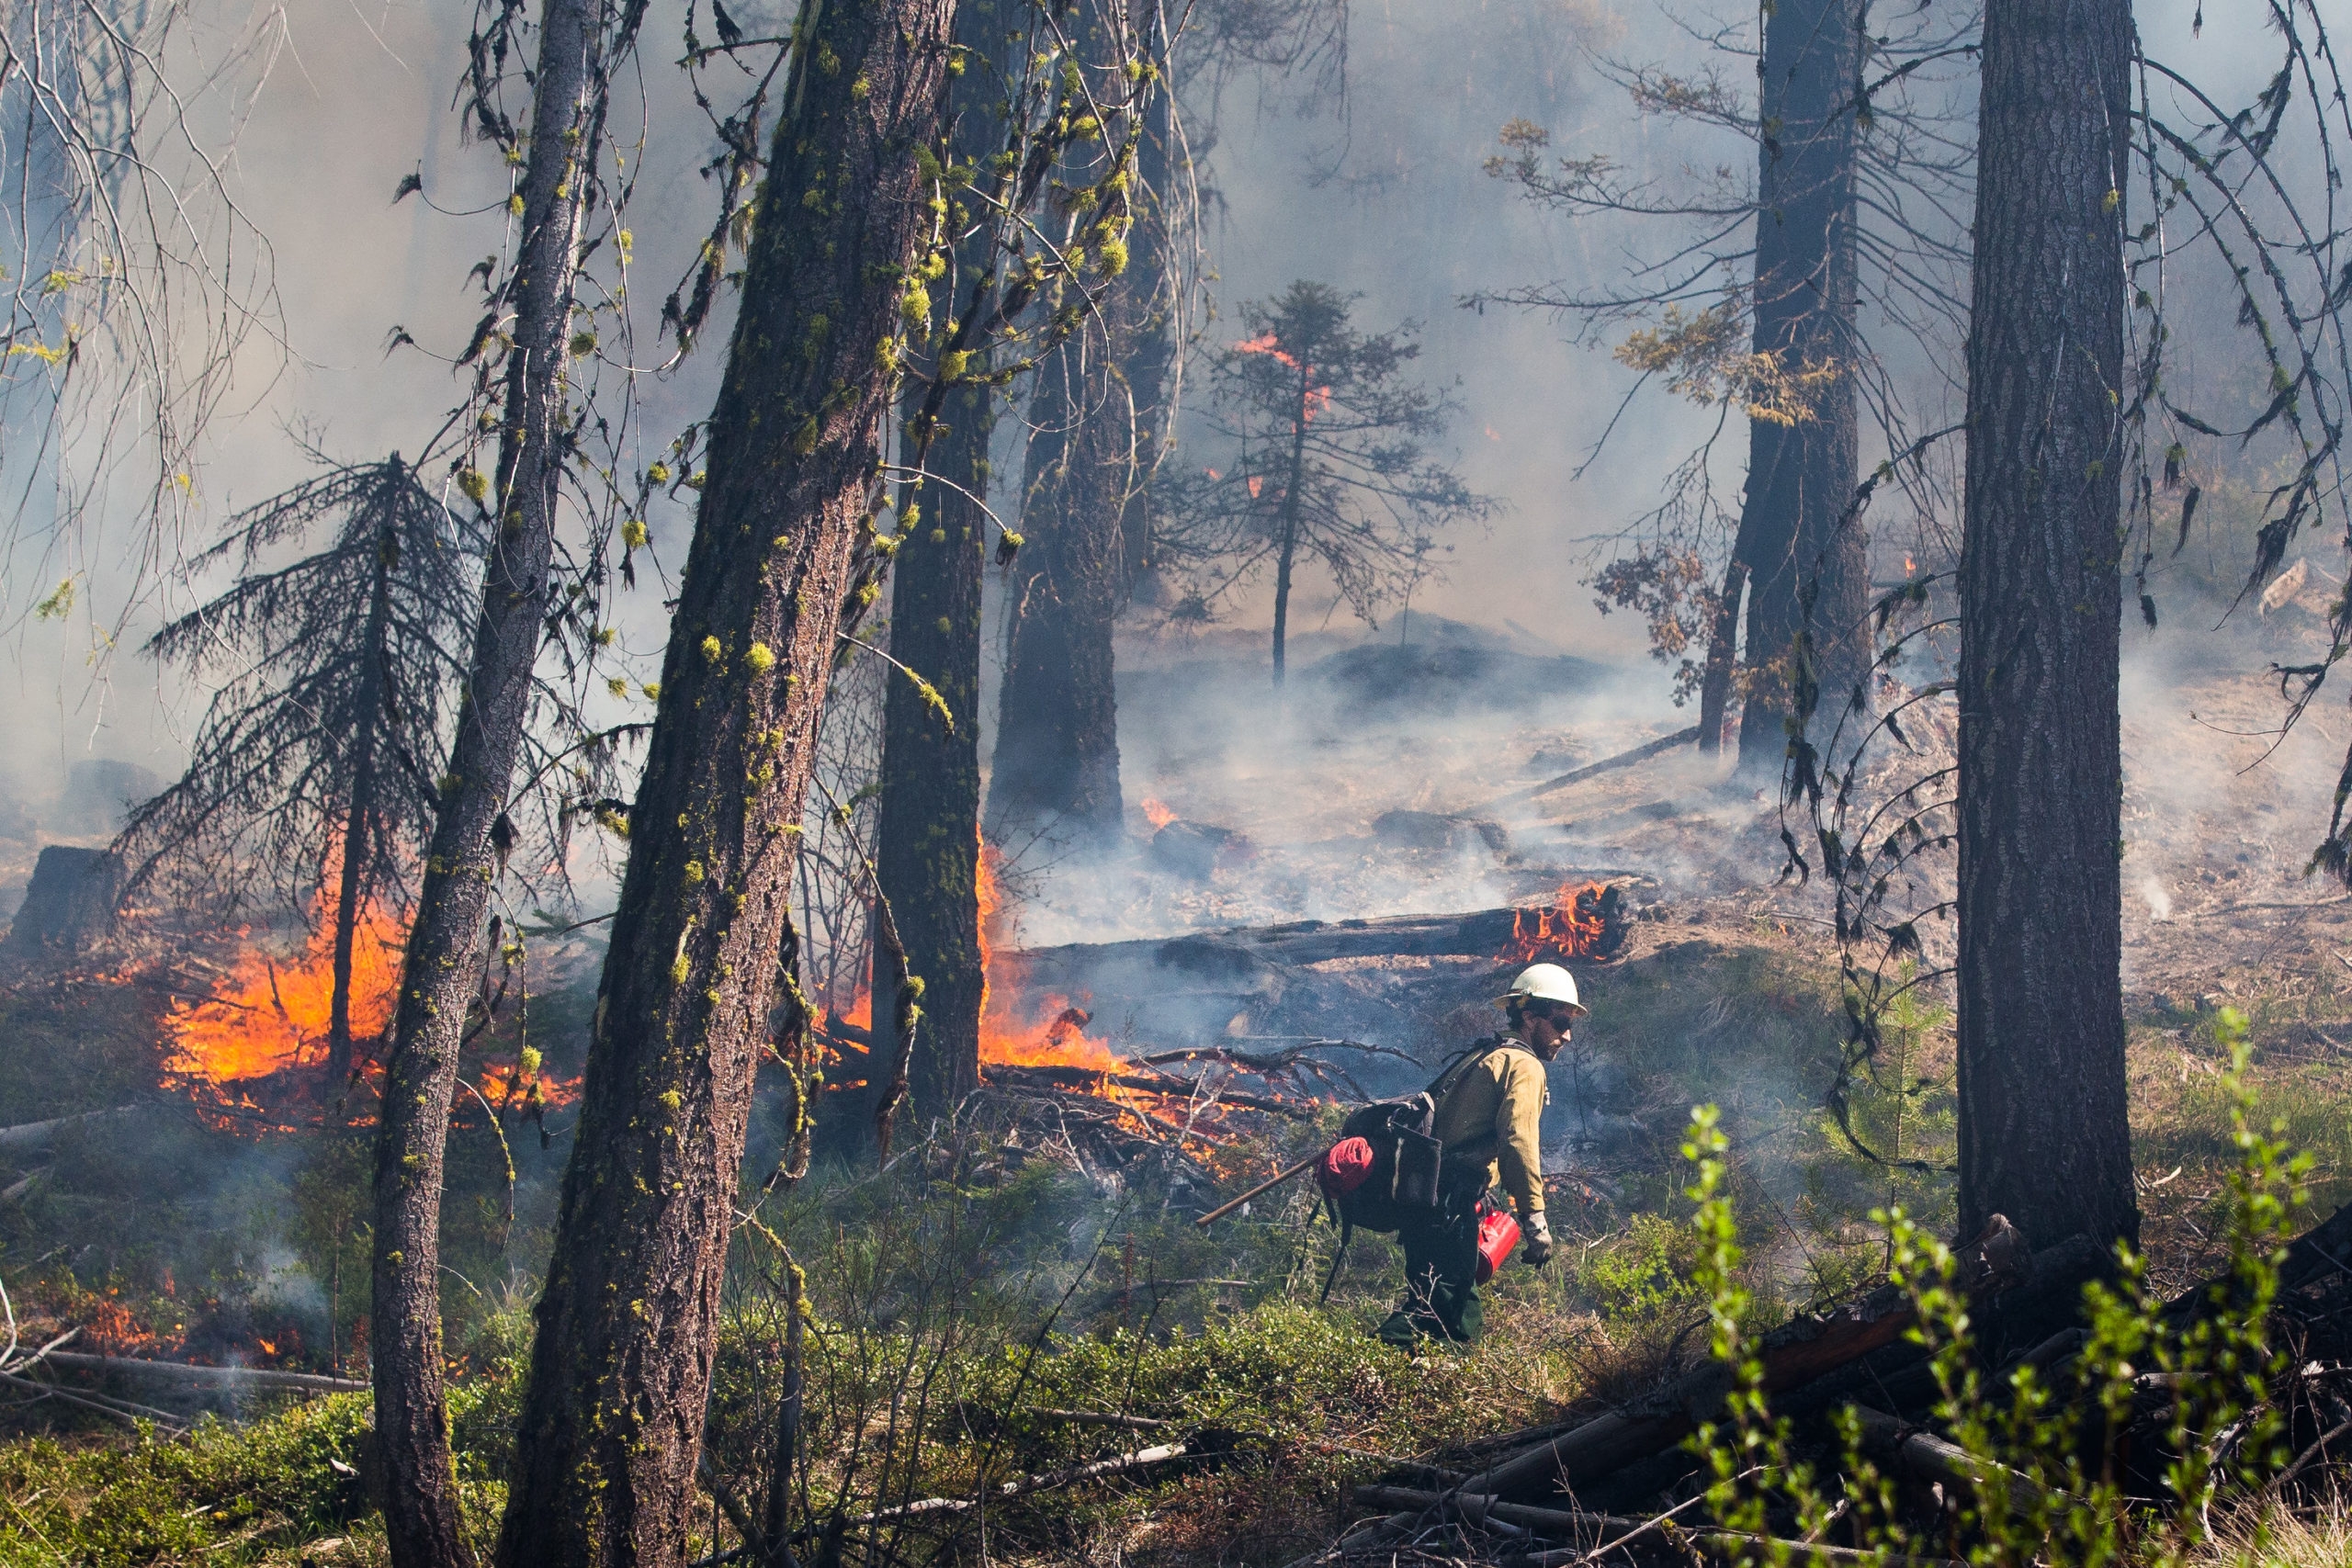 How have wildfires affected you? Tell us your story